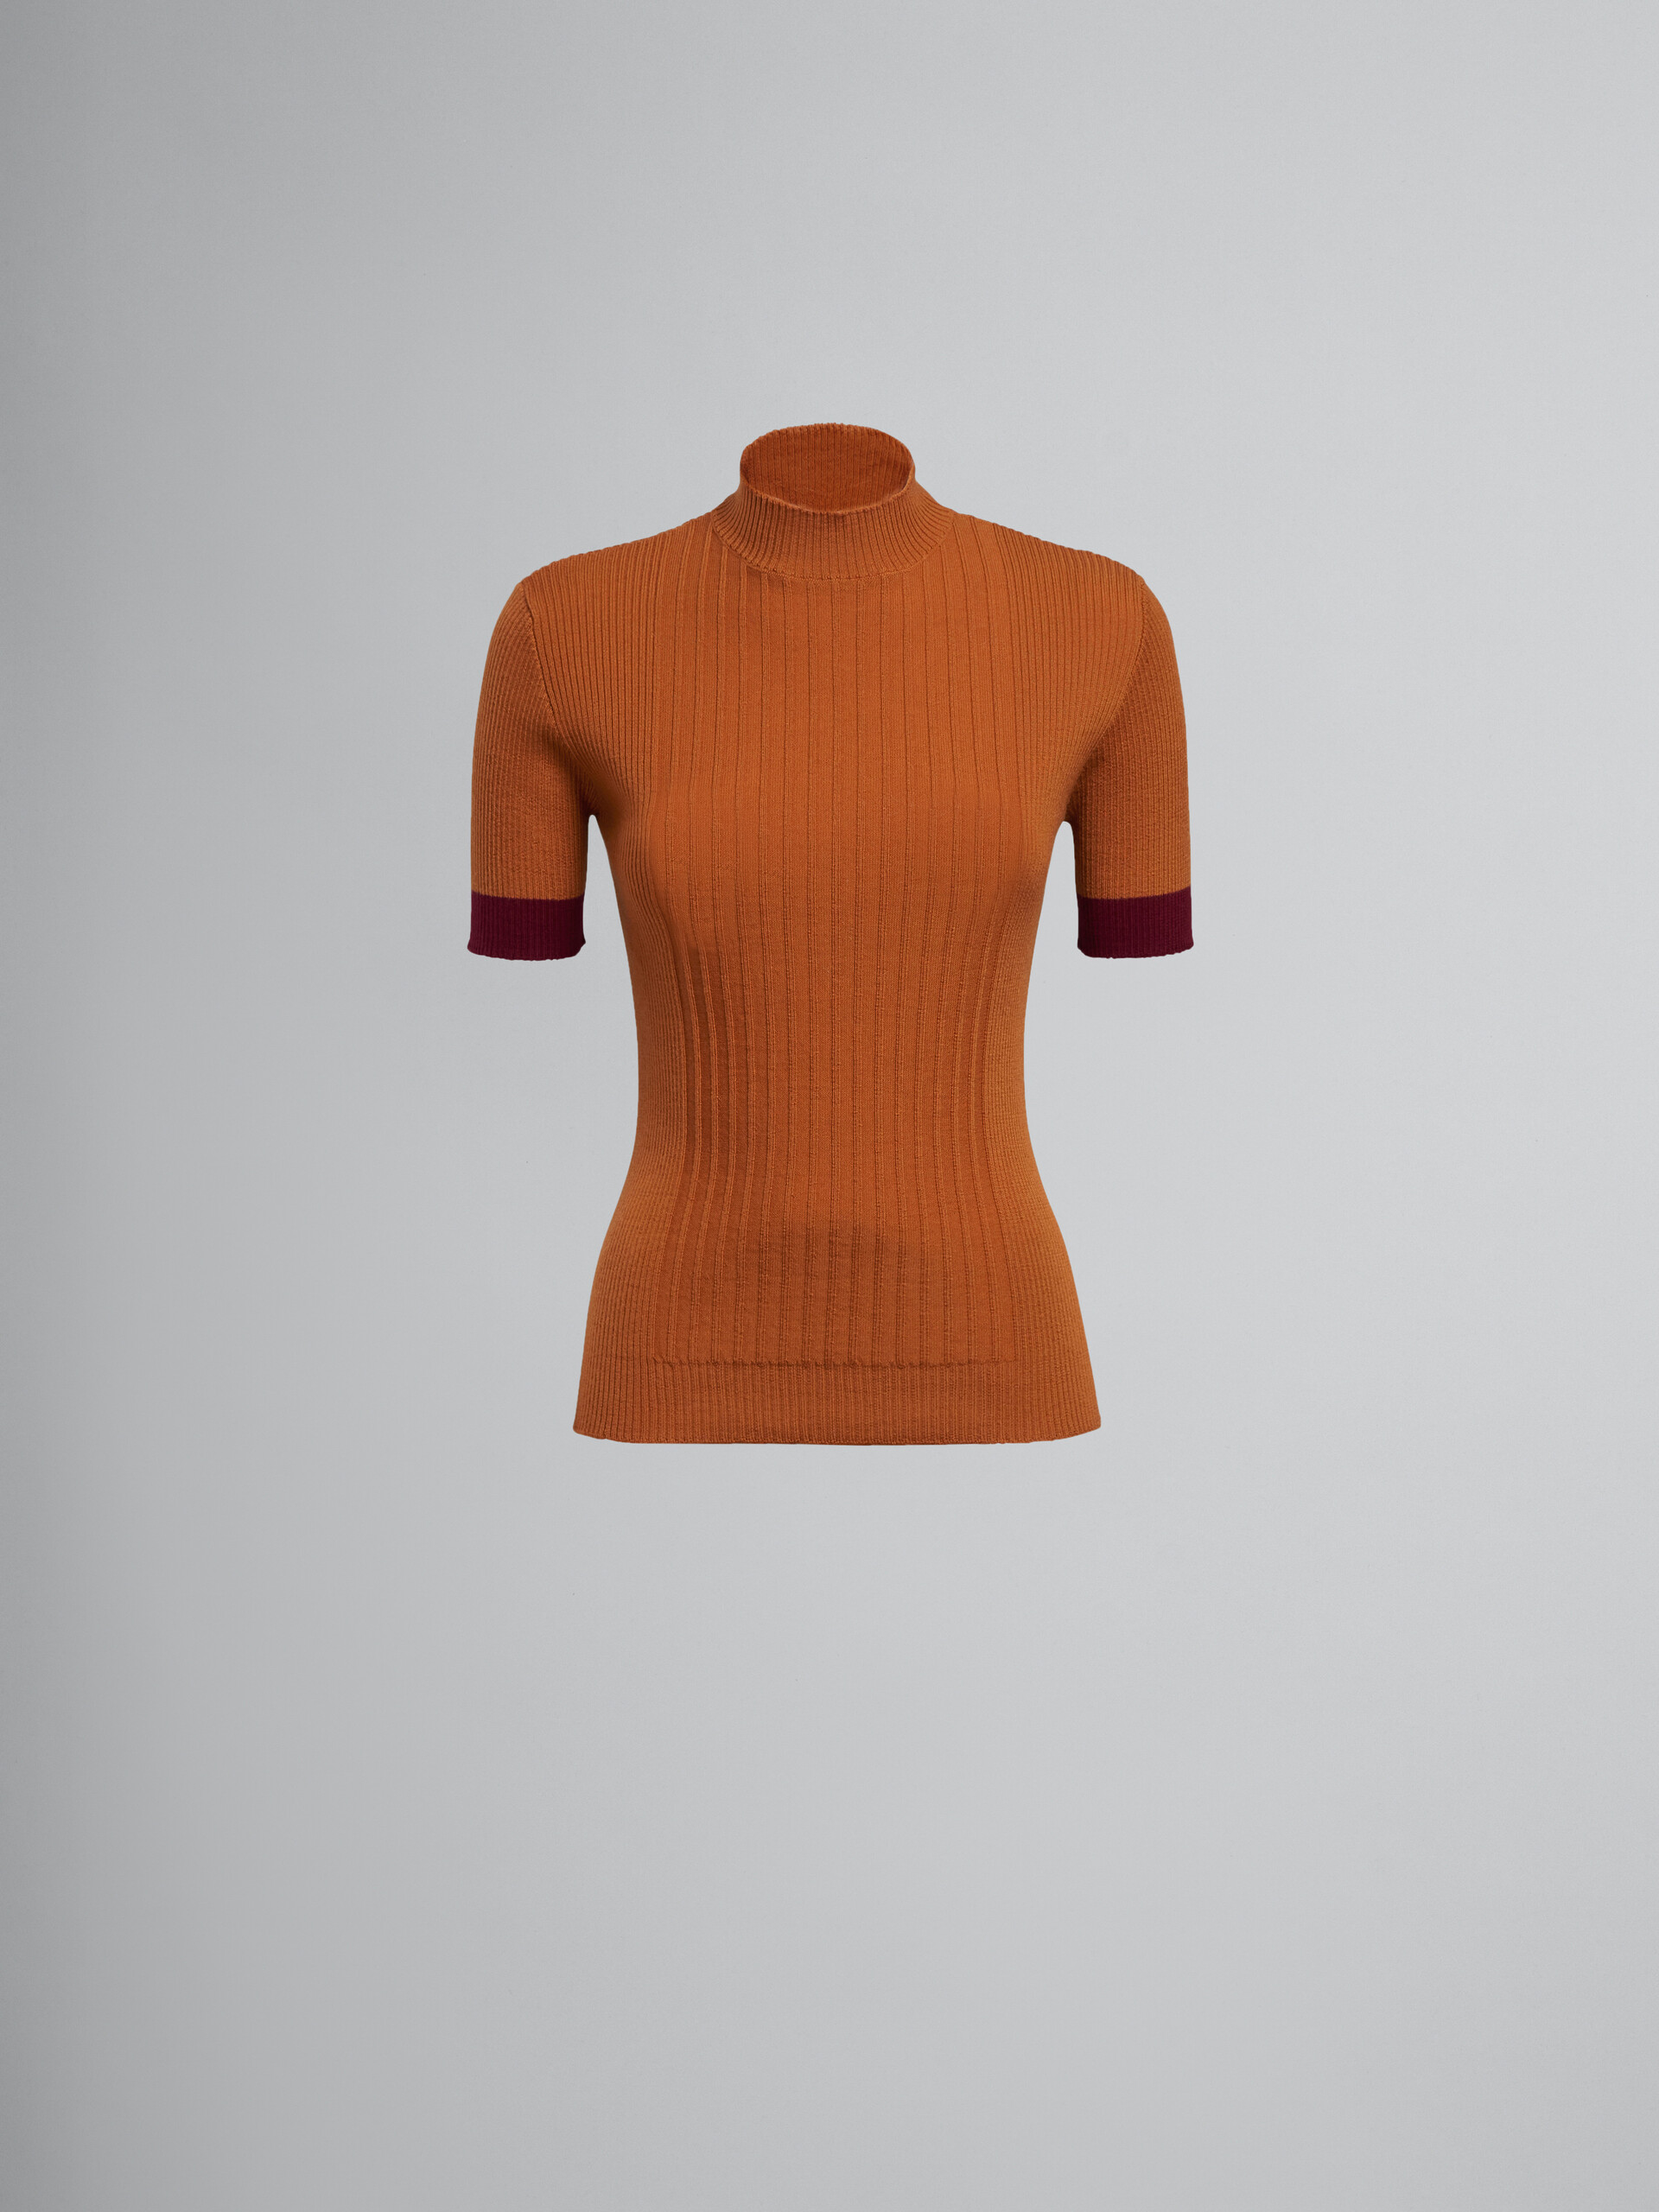 Orange wool turtleneck with contrasting cuffs - Pullovers - Image 1